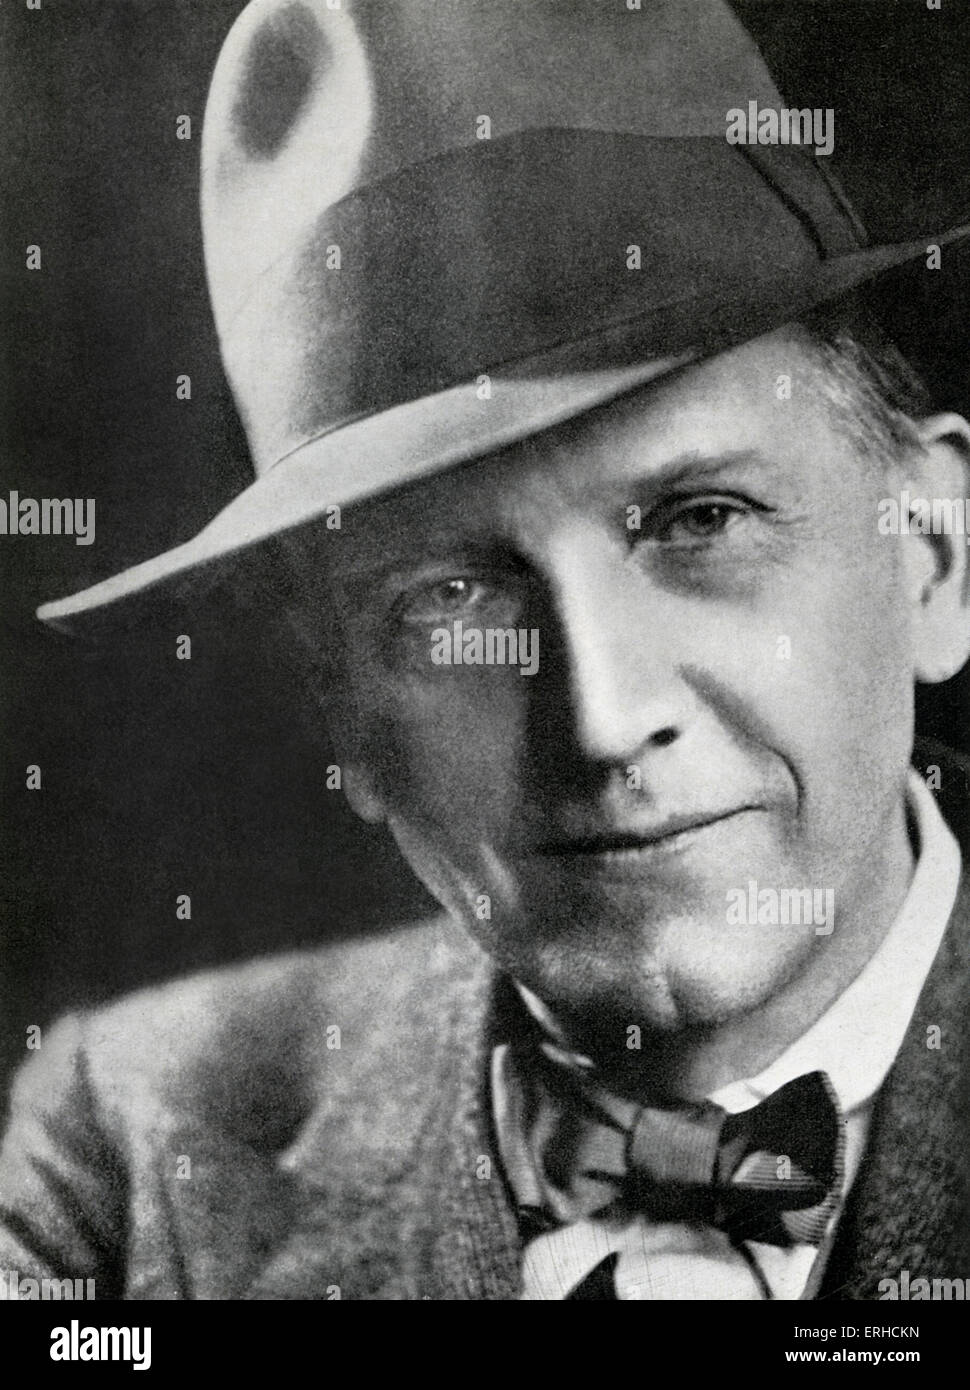 A A Milne, Alan Alexander Milne, English author, best known for creating ...